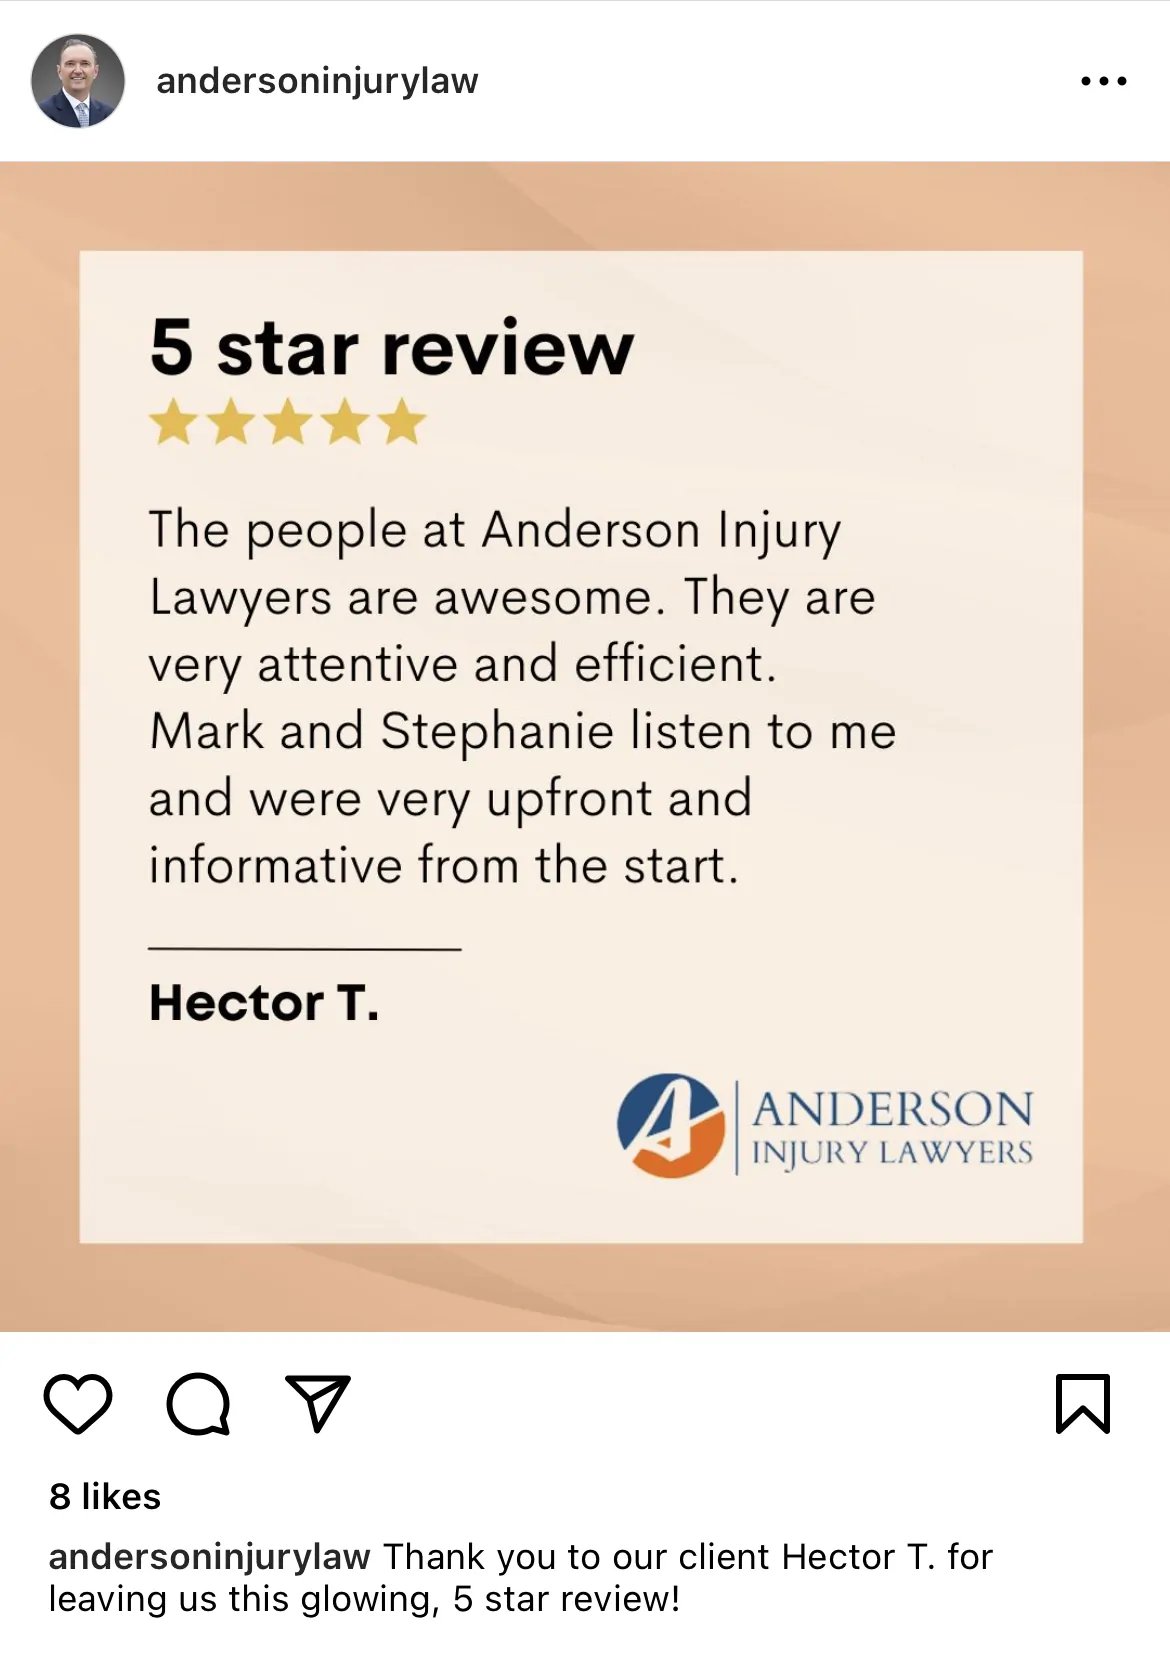 Anderson Injury Law Review